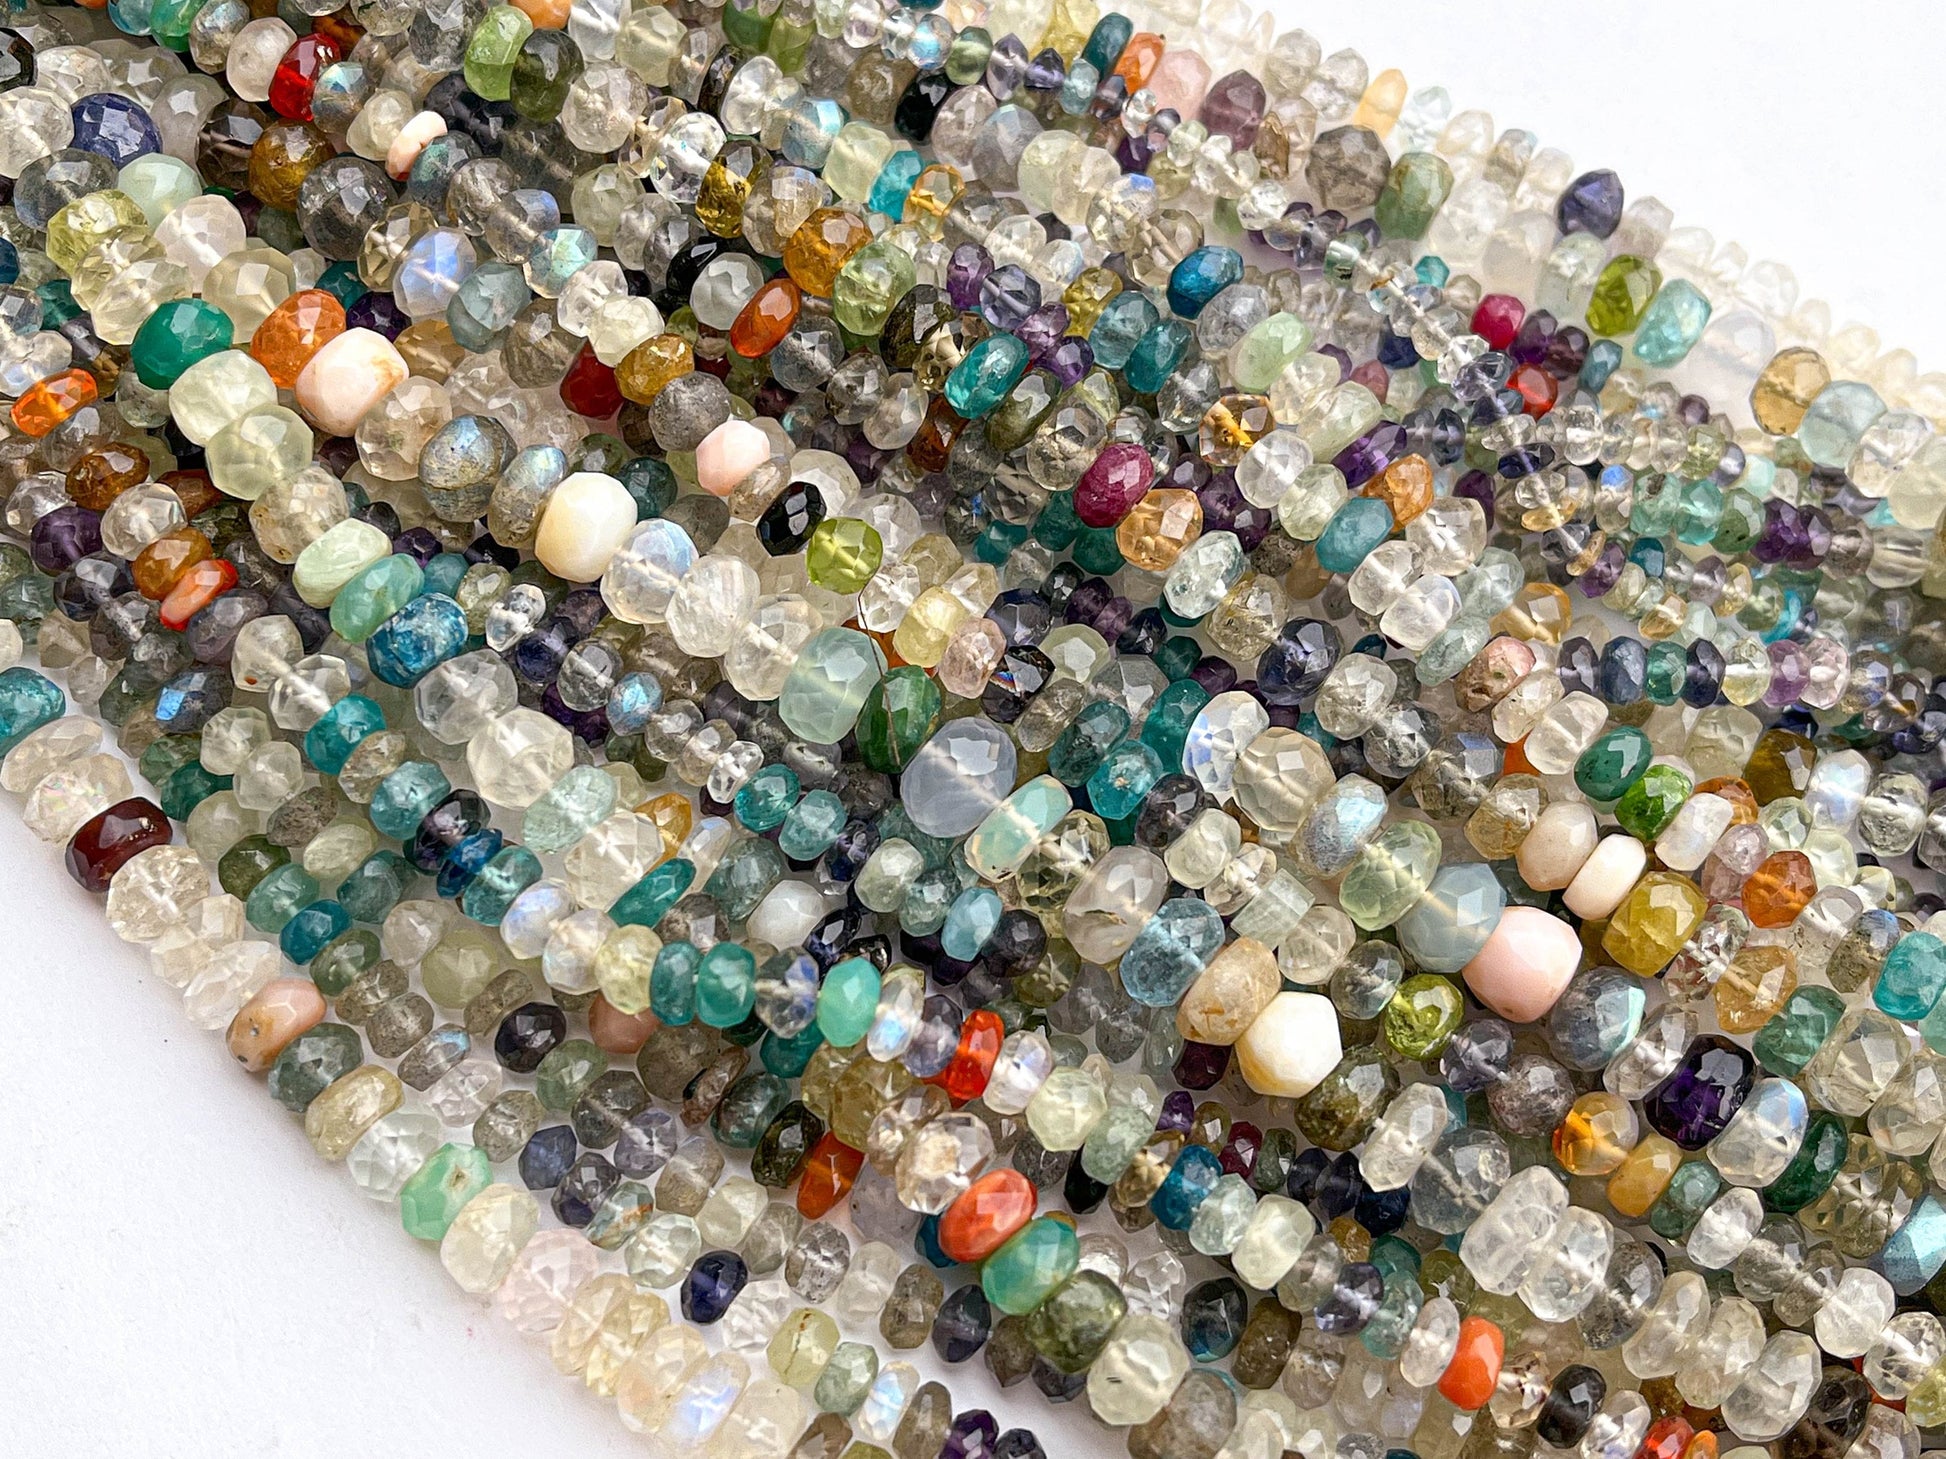 16 Inch Multi Gemstone Faceted Rondelle Shape Beads, Multi Gemstone Faceted Beads, 16 Inch String, Mix Semi Precious Gemstone Beads Beadsforyourjewelry